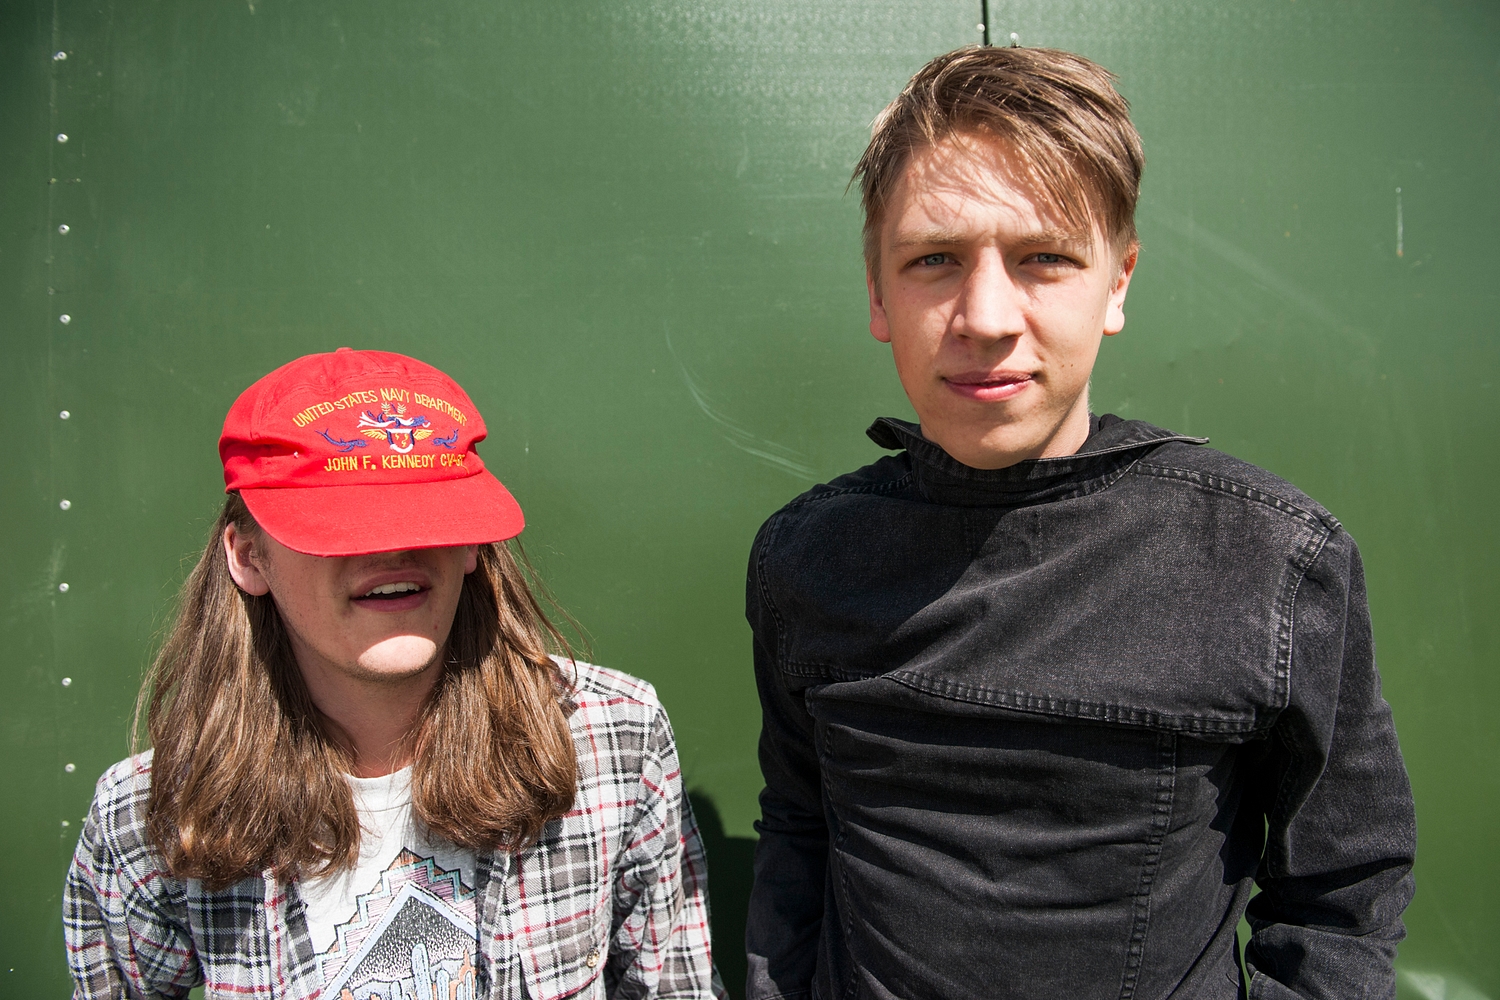 Drenge prepare for their main stage debut: “We deserve the main stage. In fact, the main stage deserves us.”